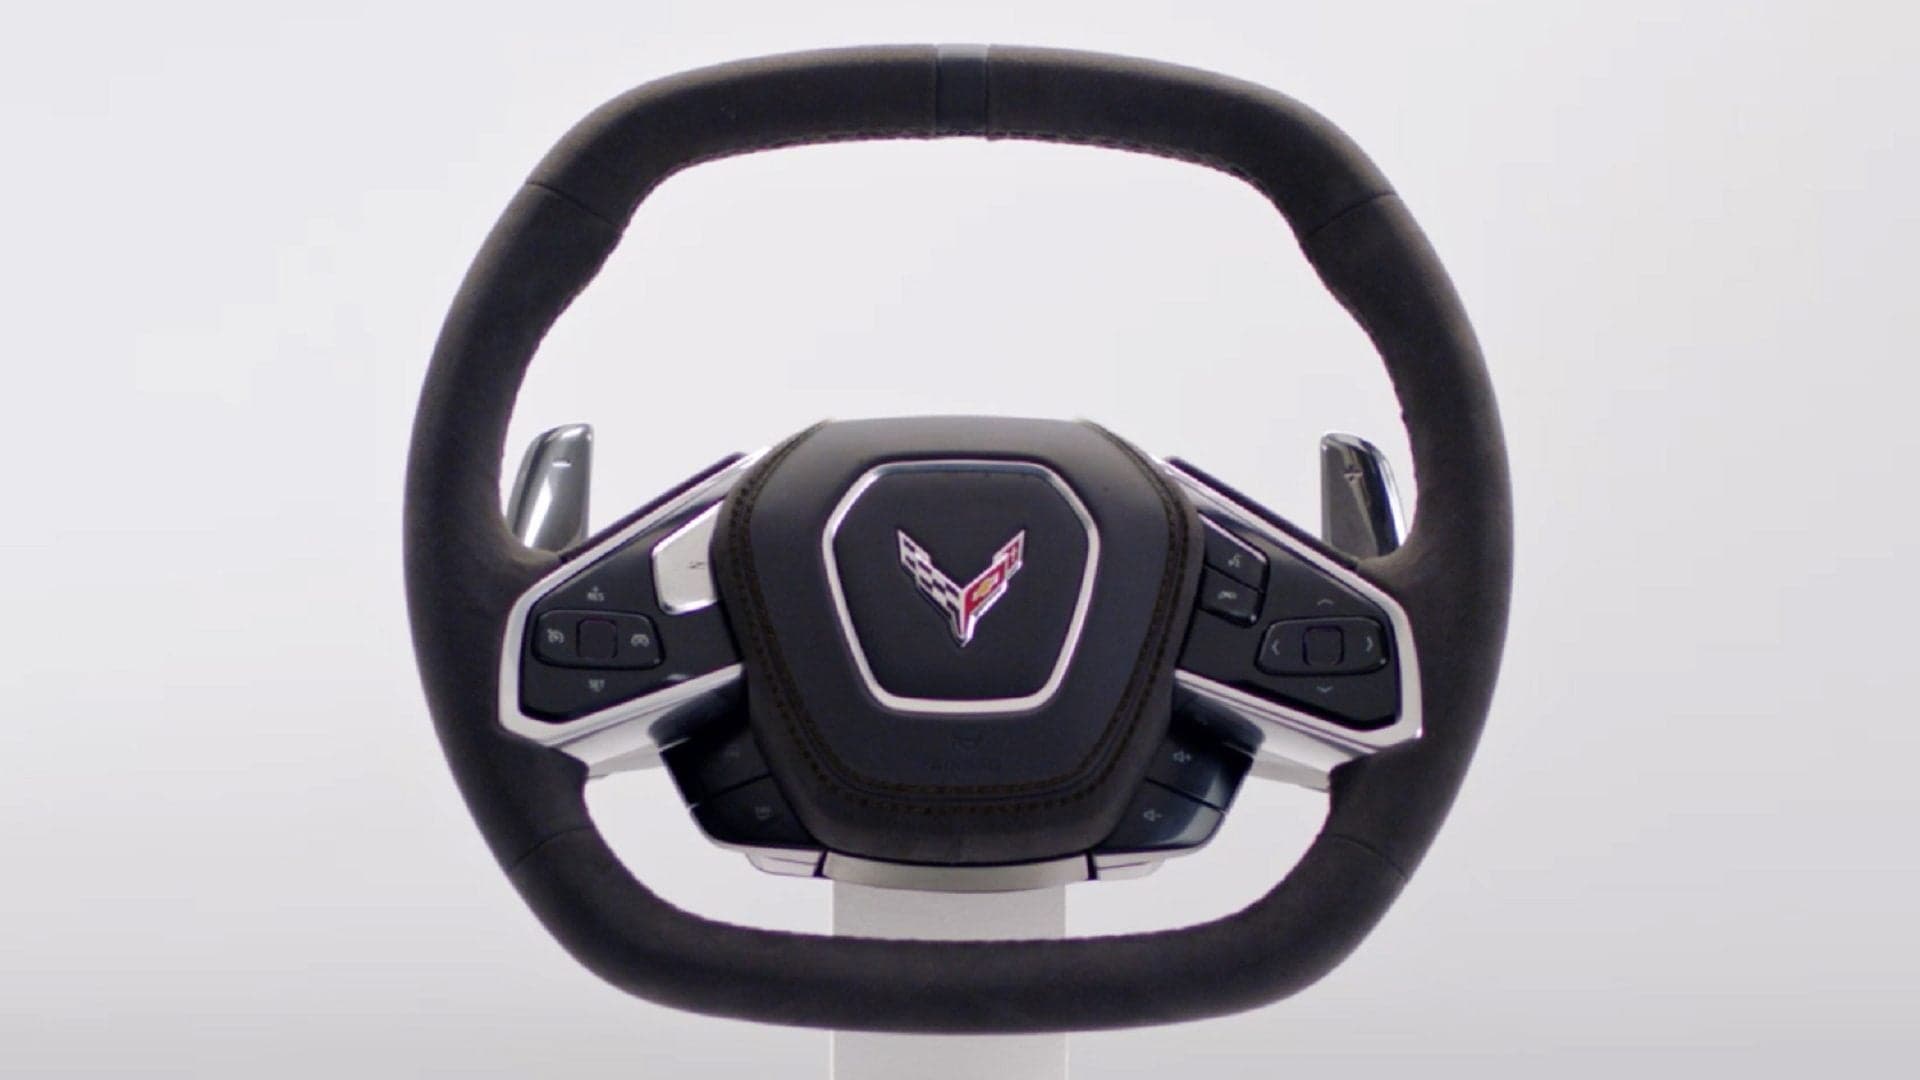 This Is the Mid-Engine 2020 Chevrolet Corvette C8’s Square Steering Wheel